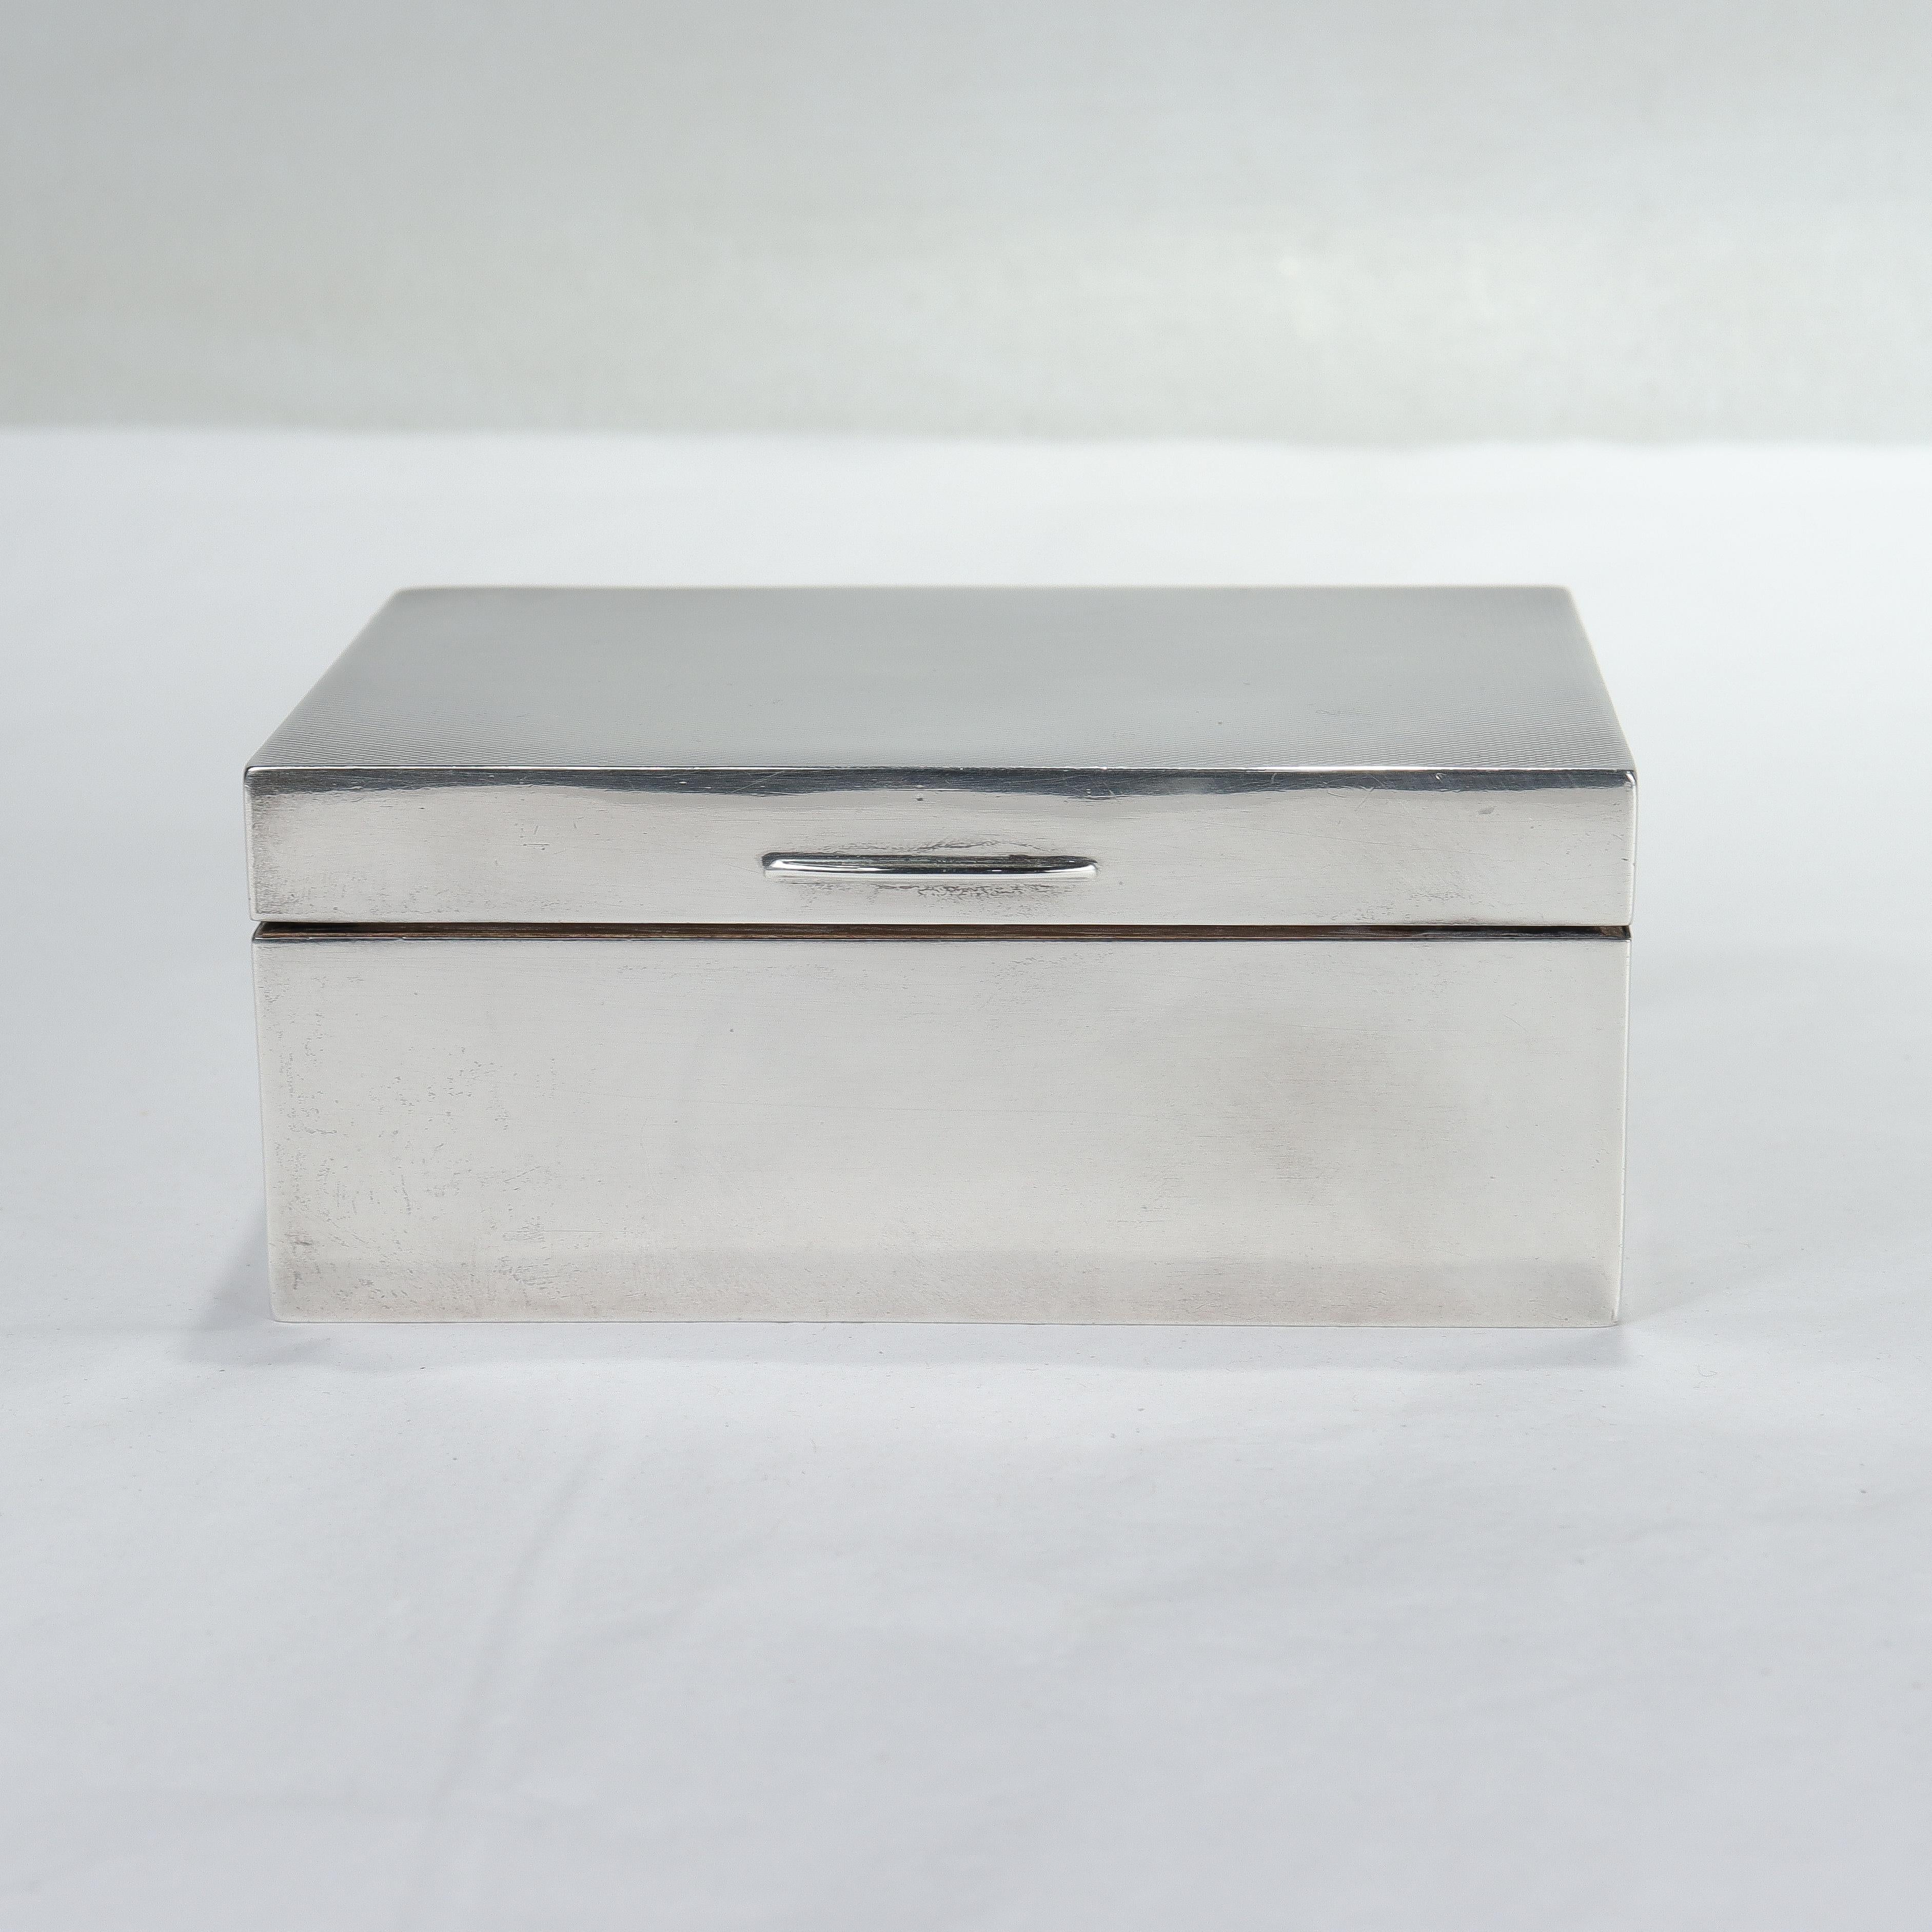 Antique Deco Sterling Silver Dresser or Vanity Box Presented by Andrew Mellon For Sale 3